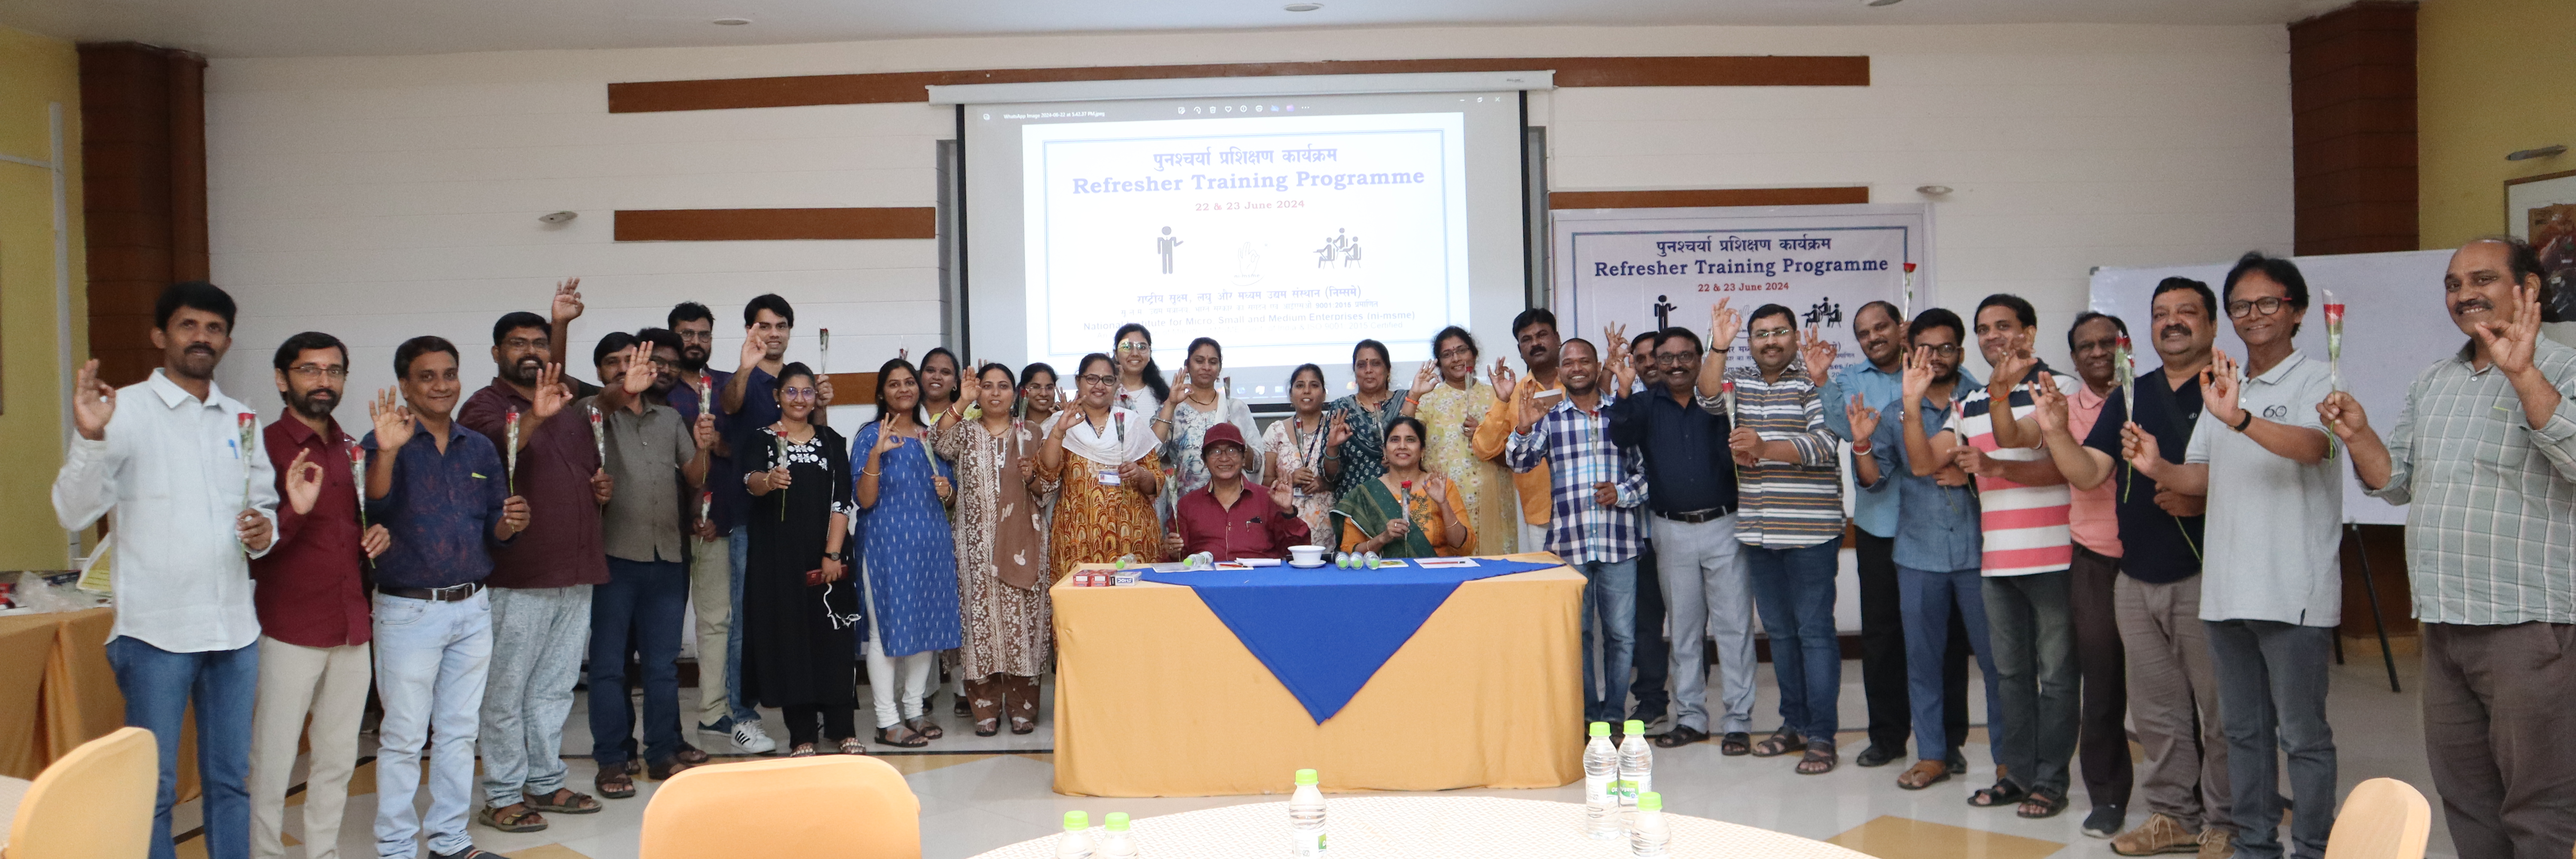 Refresher Training Programme for ni-msme Employees in connection with Foundation Day